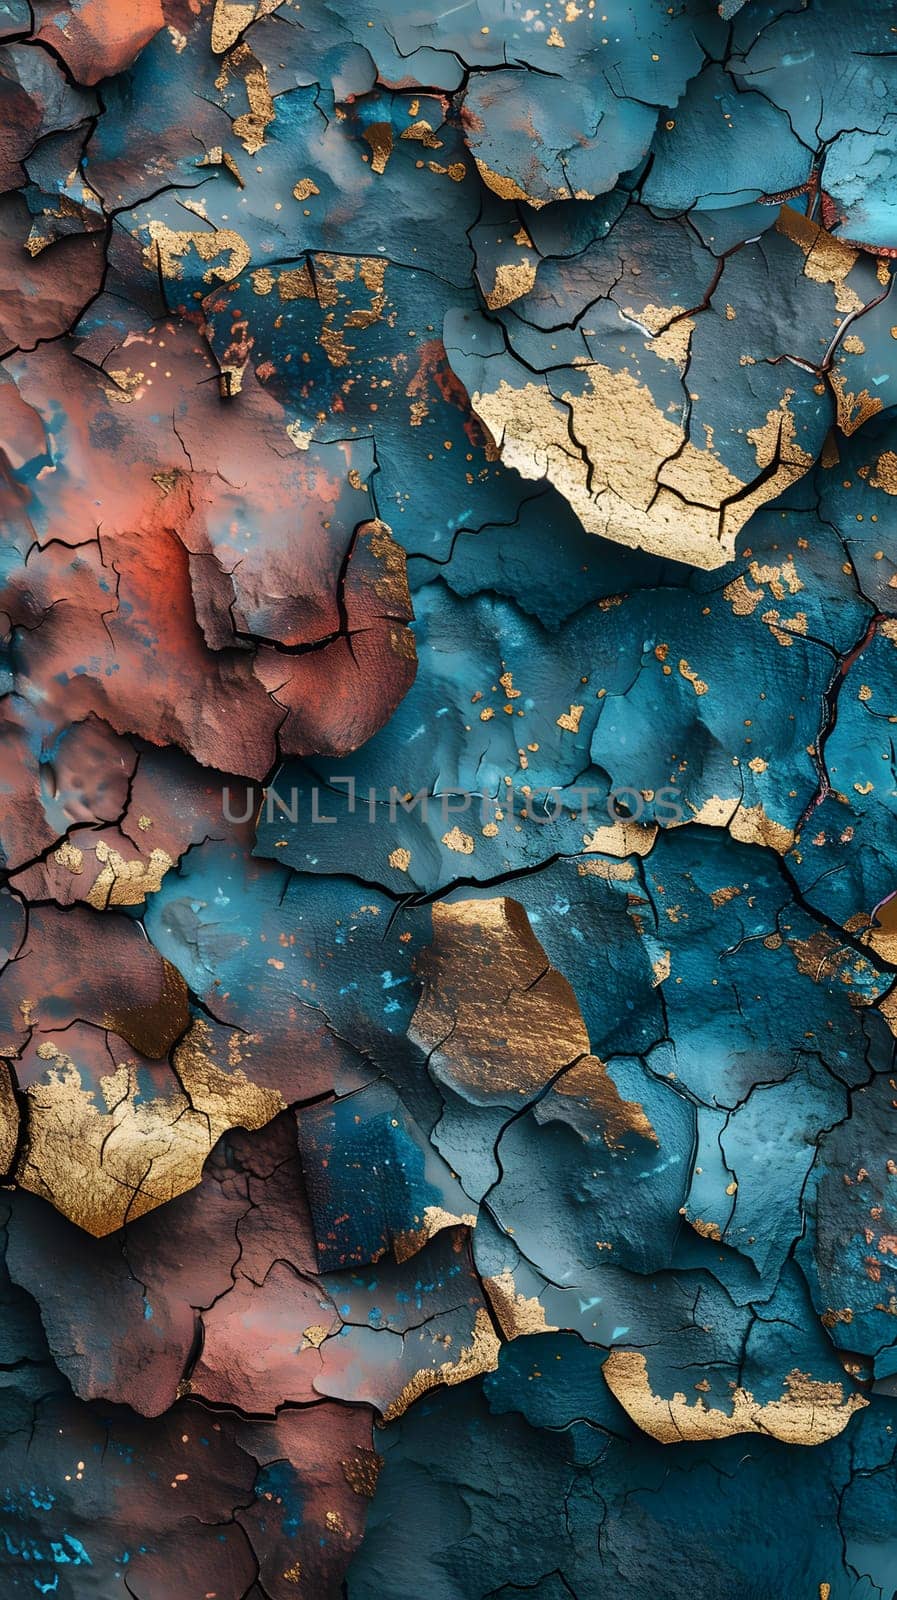 a close up of a cracked wall with blue and gold paint by Nadtochiy